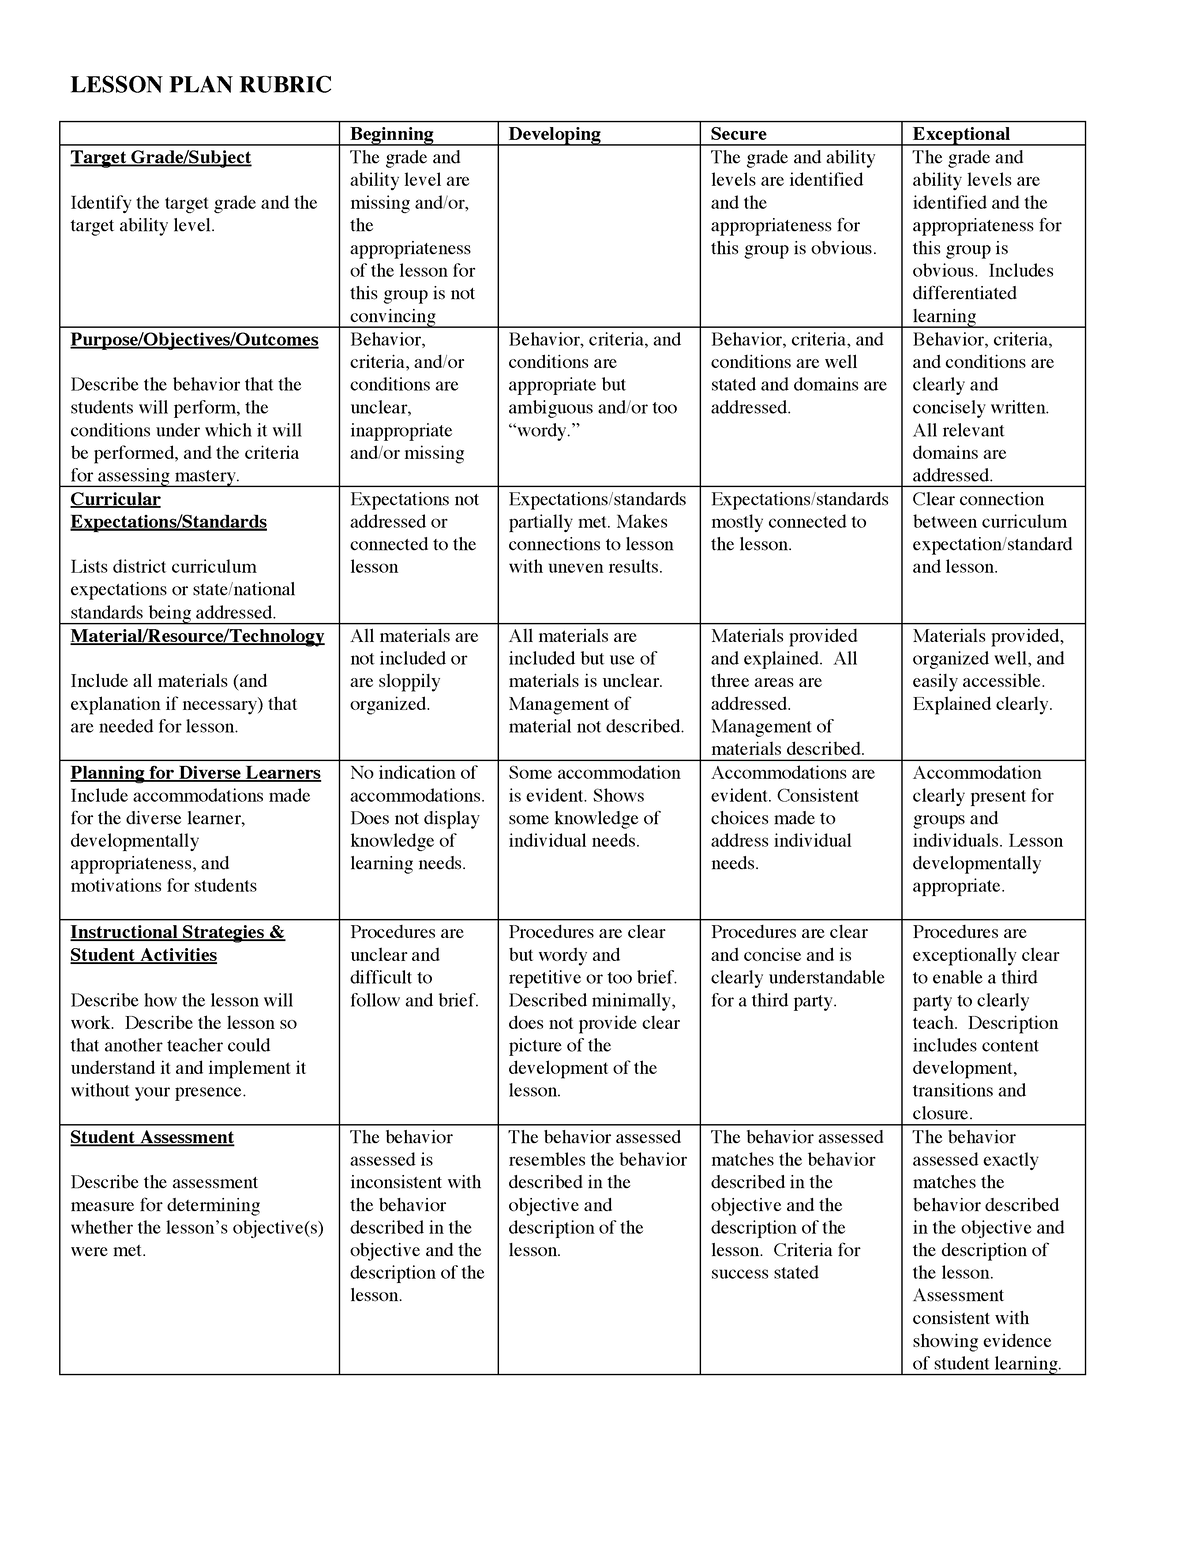 Lesson rubric - Yes - LESSON PLAN RUBRIC Beginning Developing Secure ...